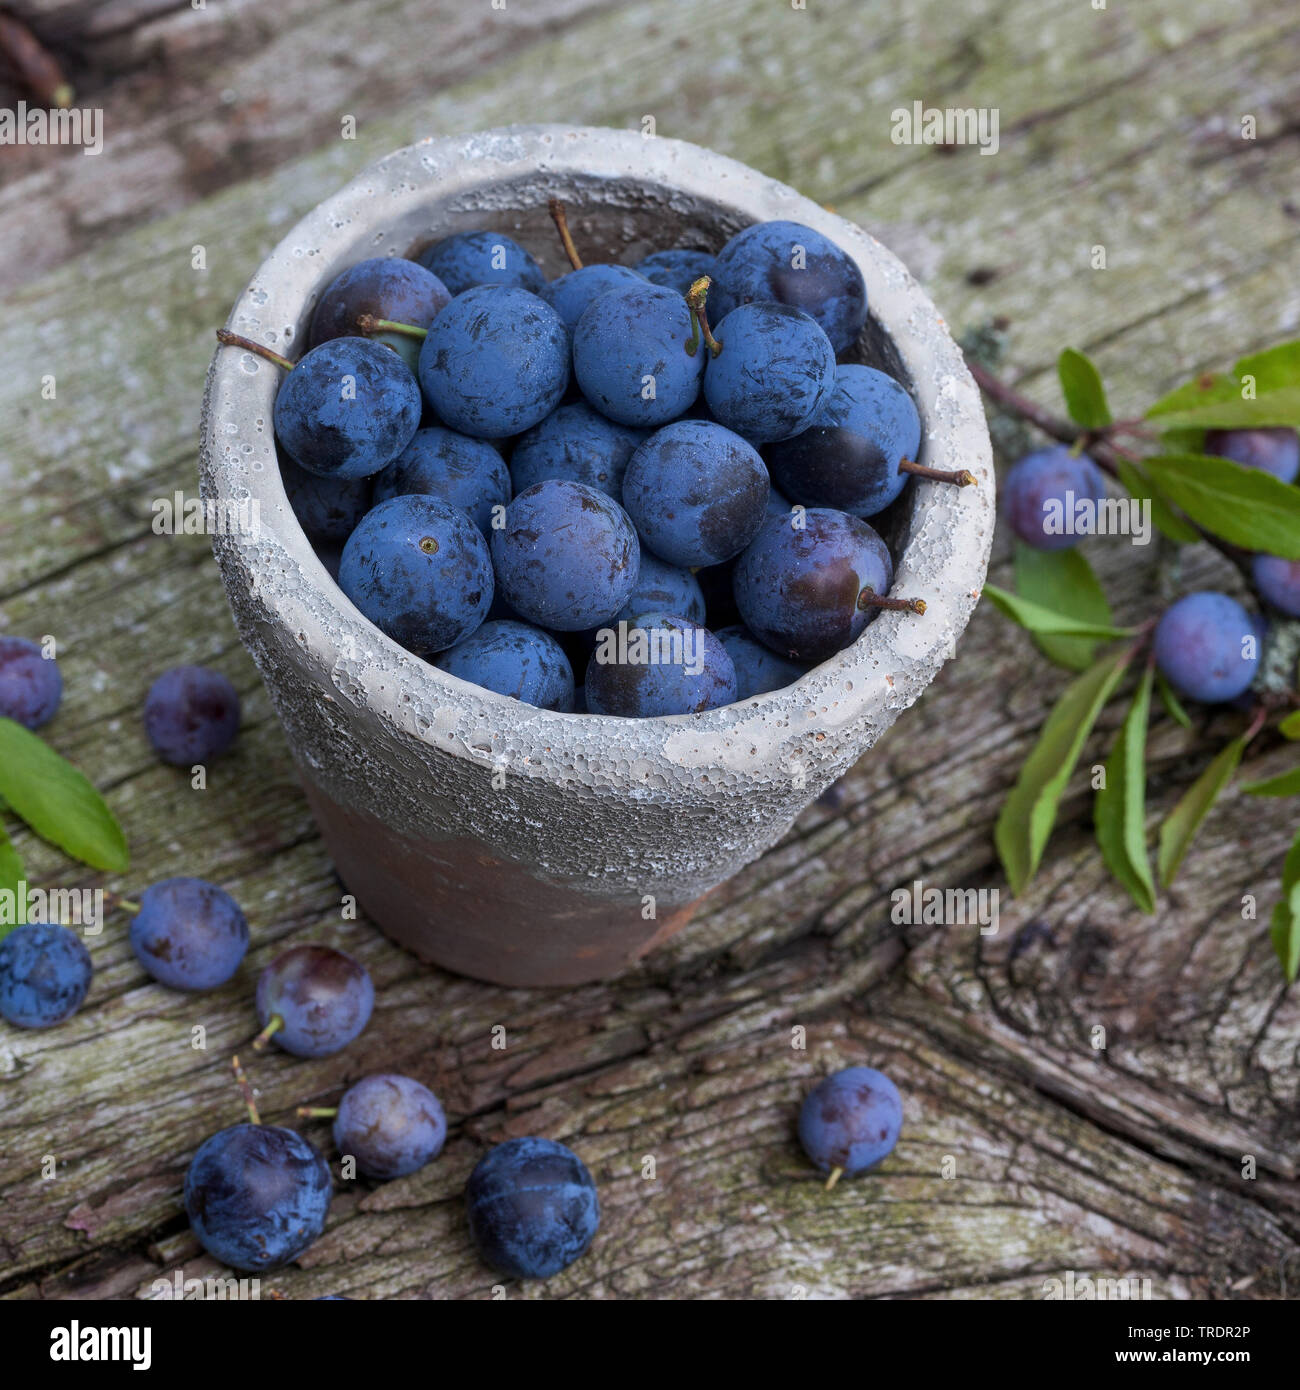 blackthorn, sloe (Prunus spinosa), collectetd fruits in a pot, Germany Stock Photo